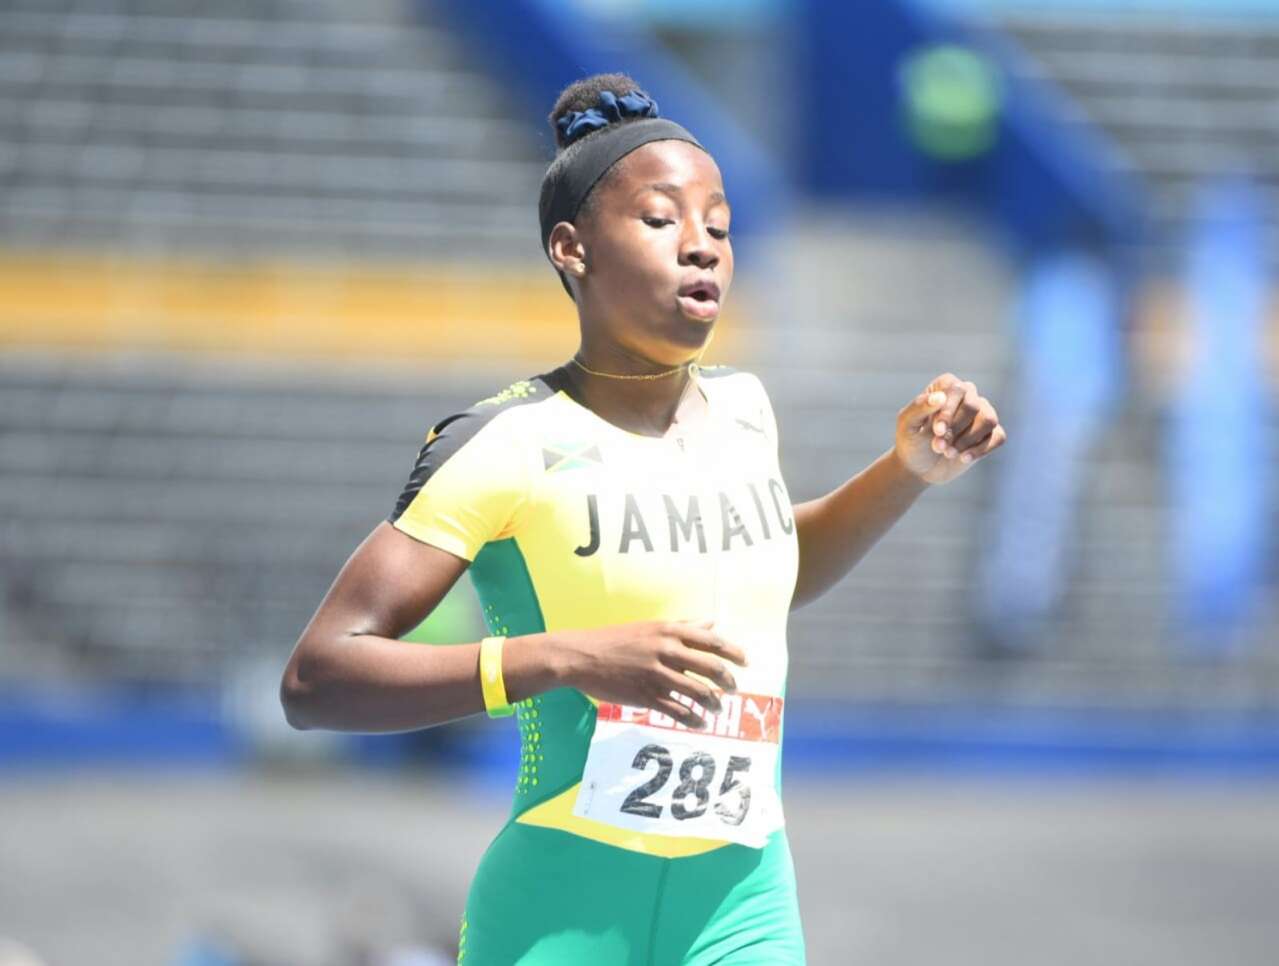 Theianna-Lee Terrelonge adds another triumph! After securing the 100m title on Friday, she blazes to victory with a meeting record time of 23.53 in the women's 200m race, leaving La’Nica Locker of Antigua and Barbuda behind at 23.64.